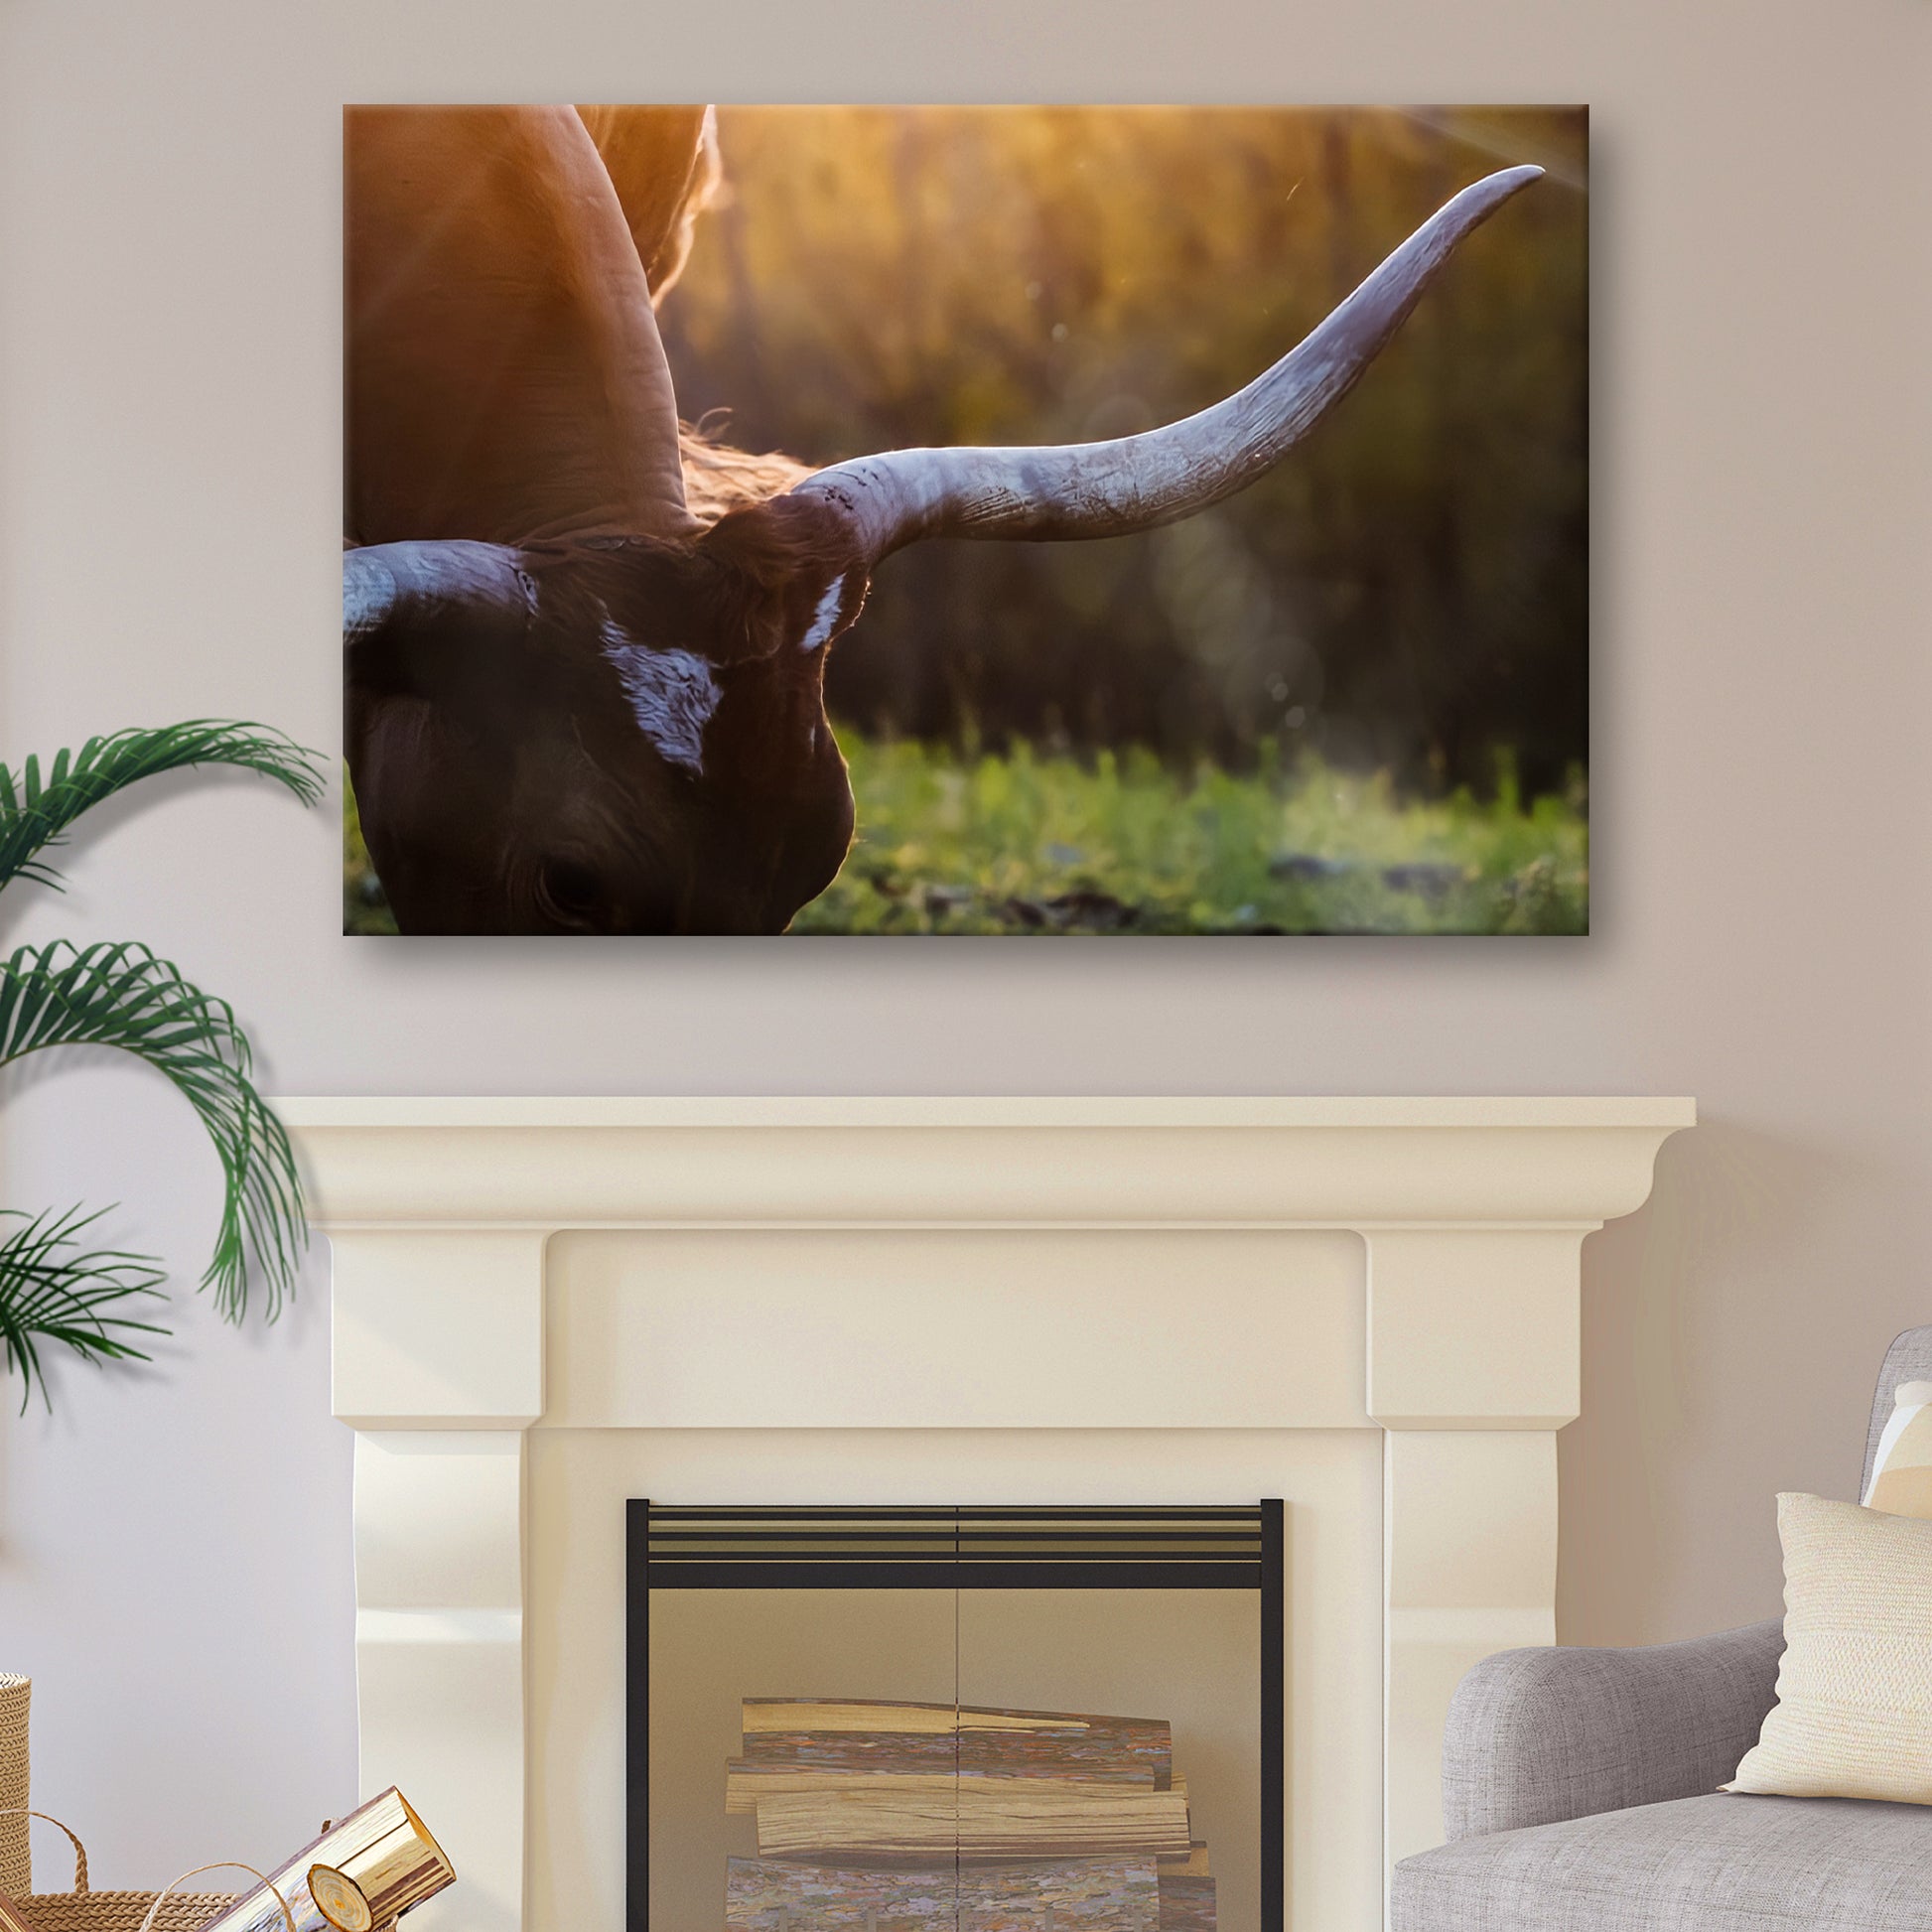 Texas Longhorn Cattle Head Canvas Wall Art - Image by Tailored Canvases